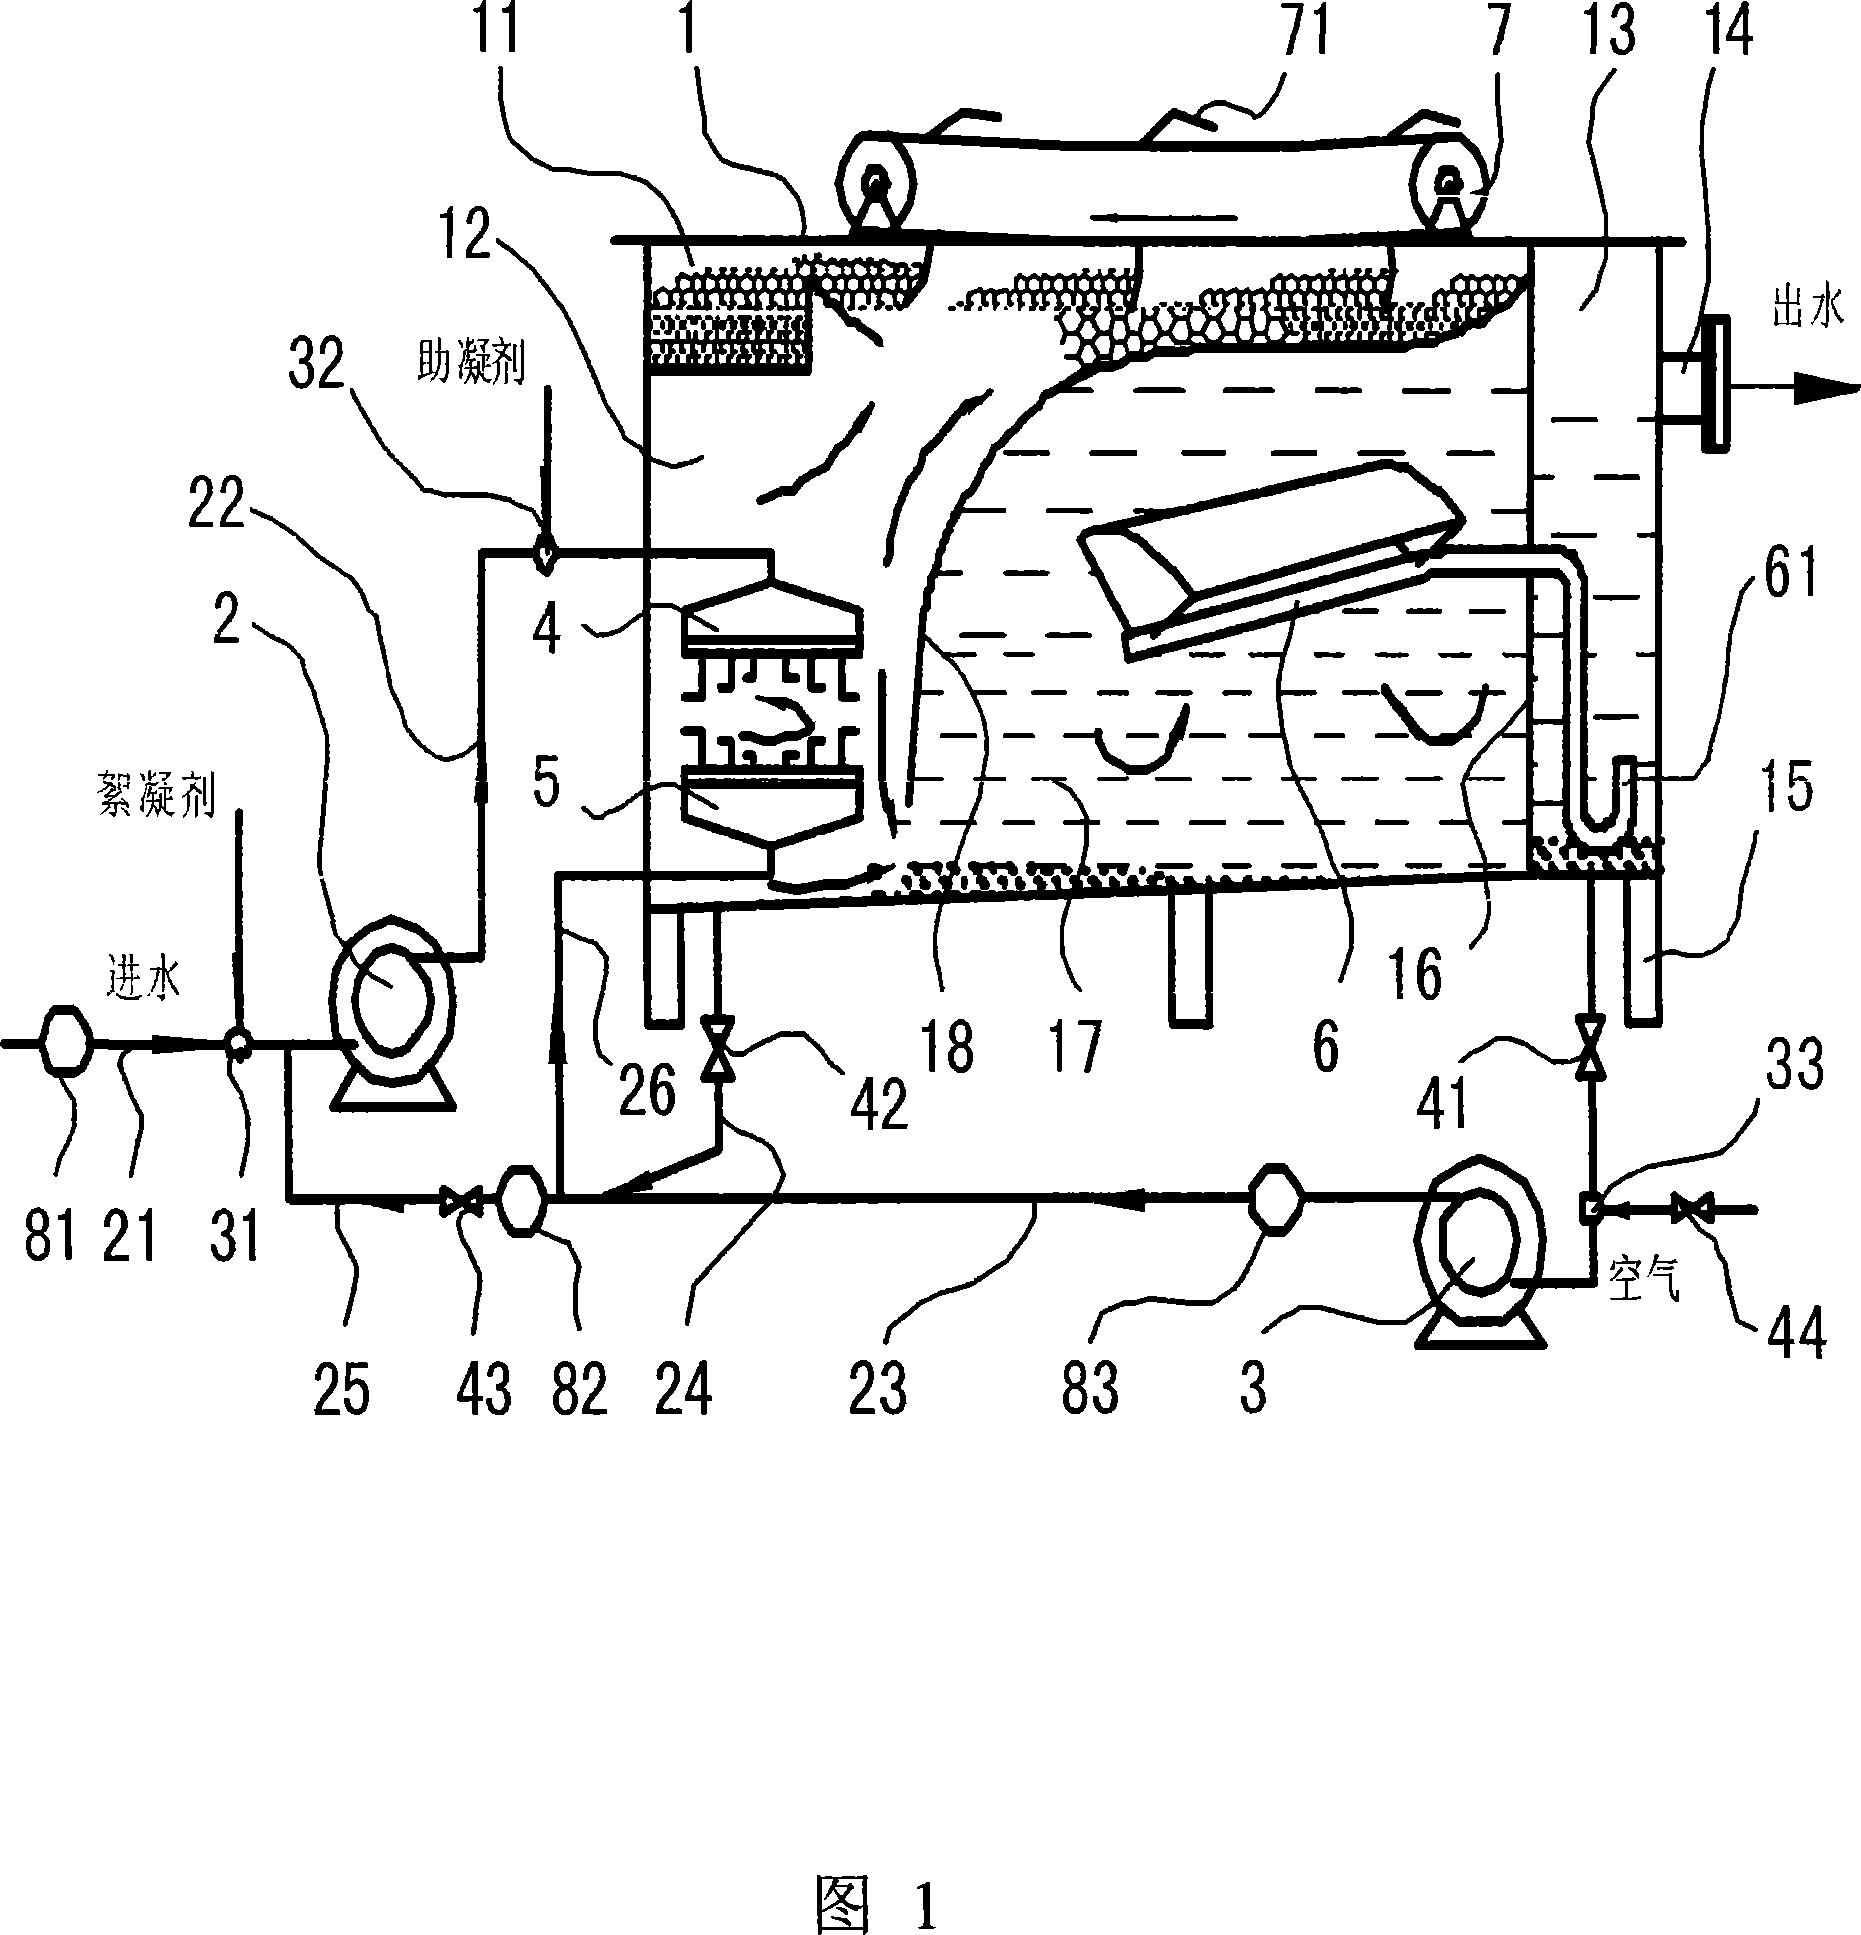 Backflow air-floating device for water-arrangement optimization multi-phase flow pump